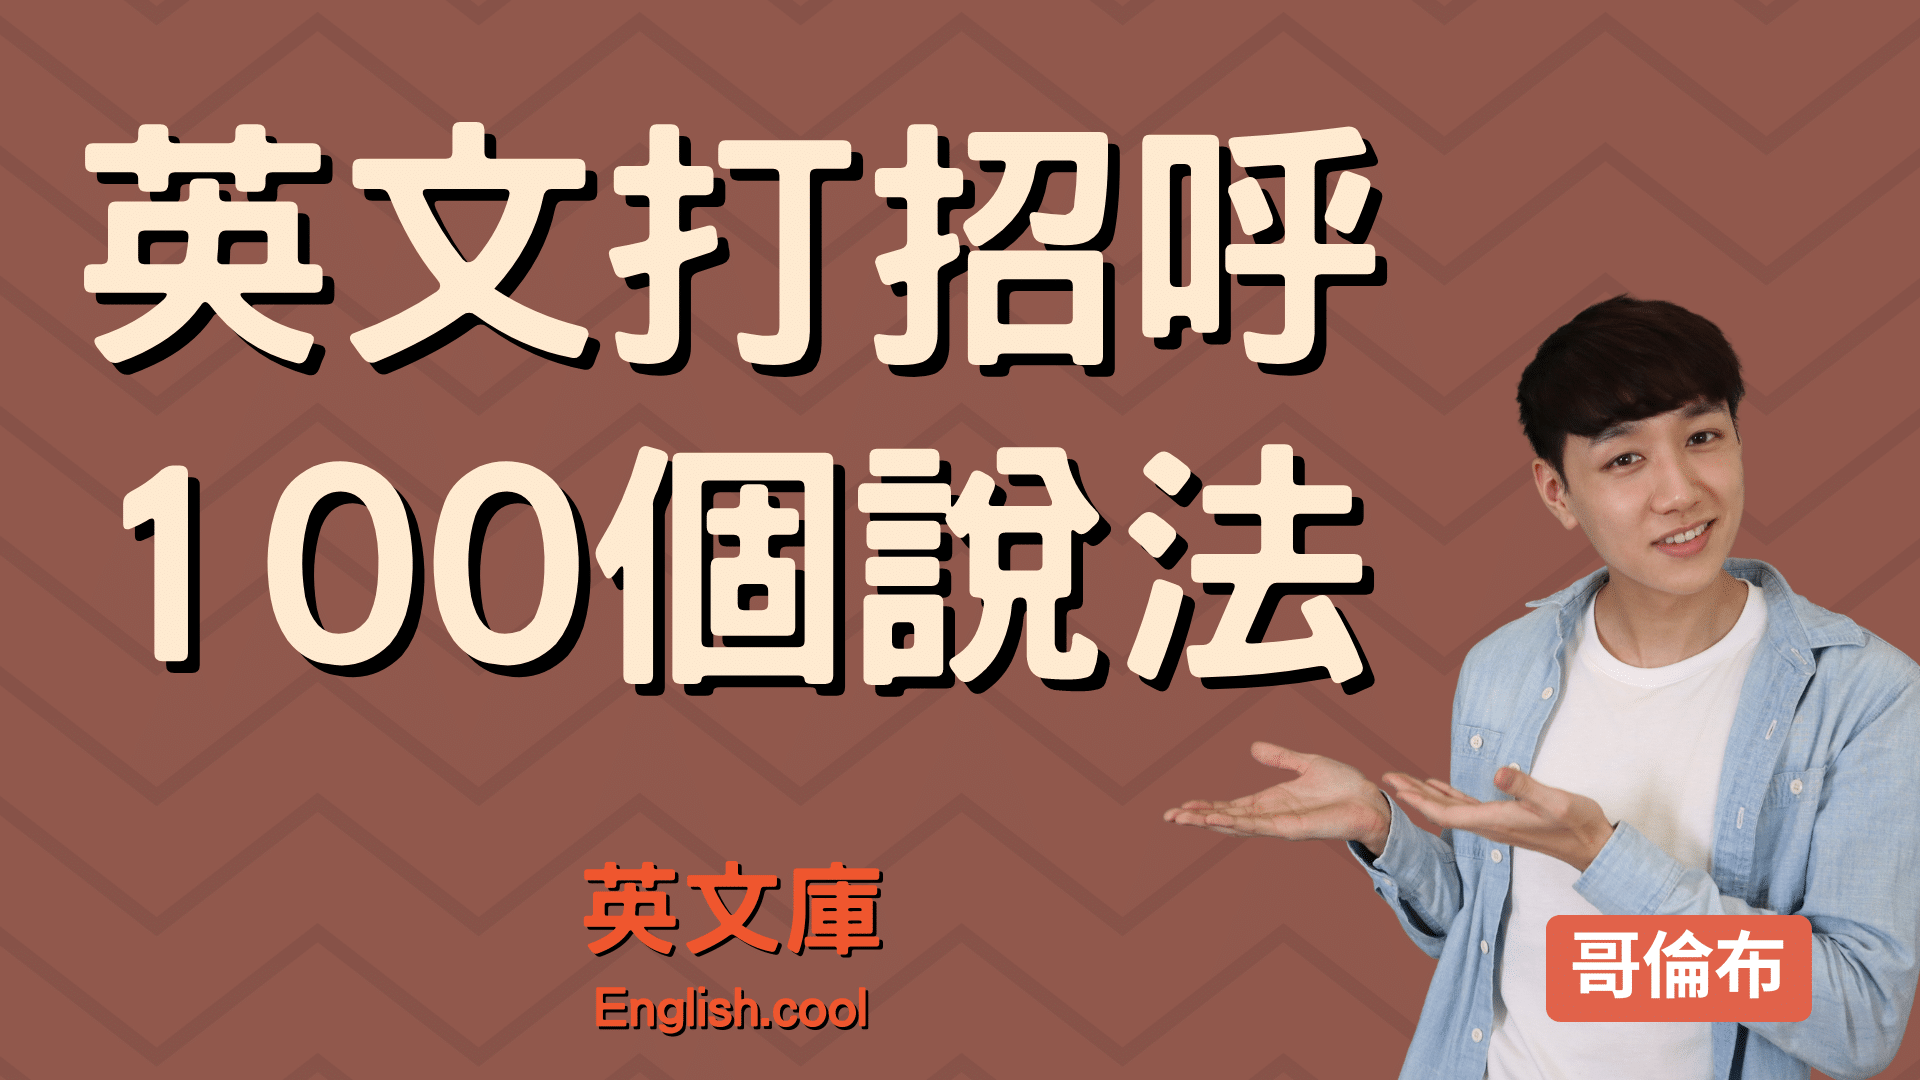 You are currently viewing 【英文打招呼】只會說 How Are You? 100最常見的英文問候語！